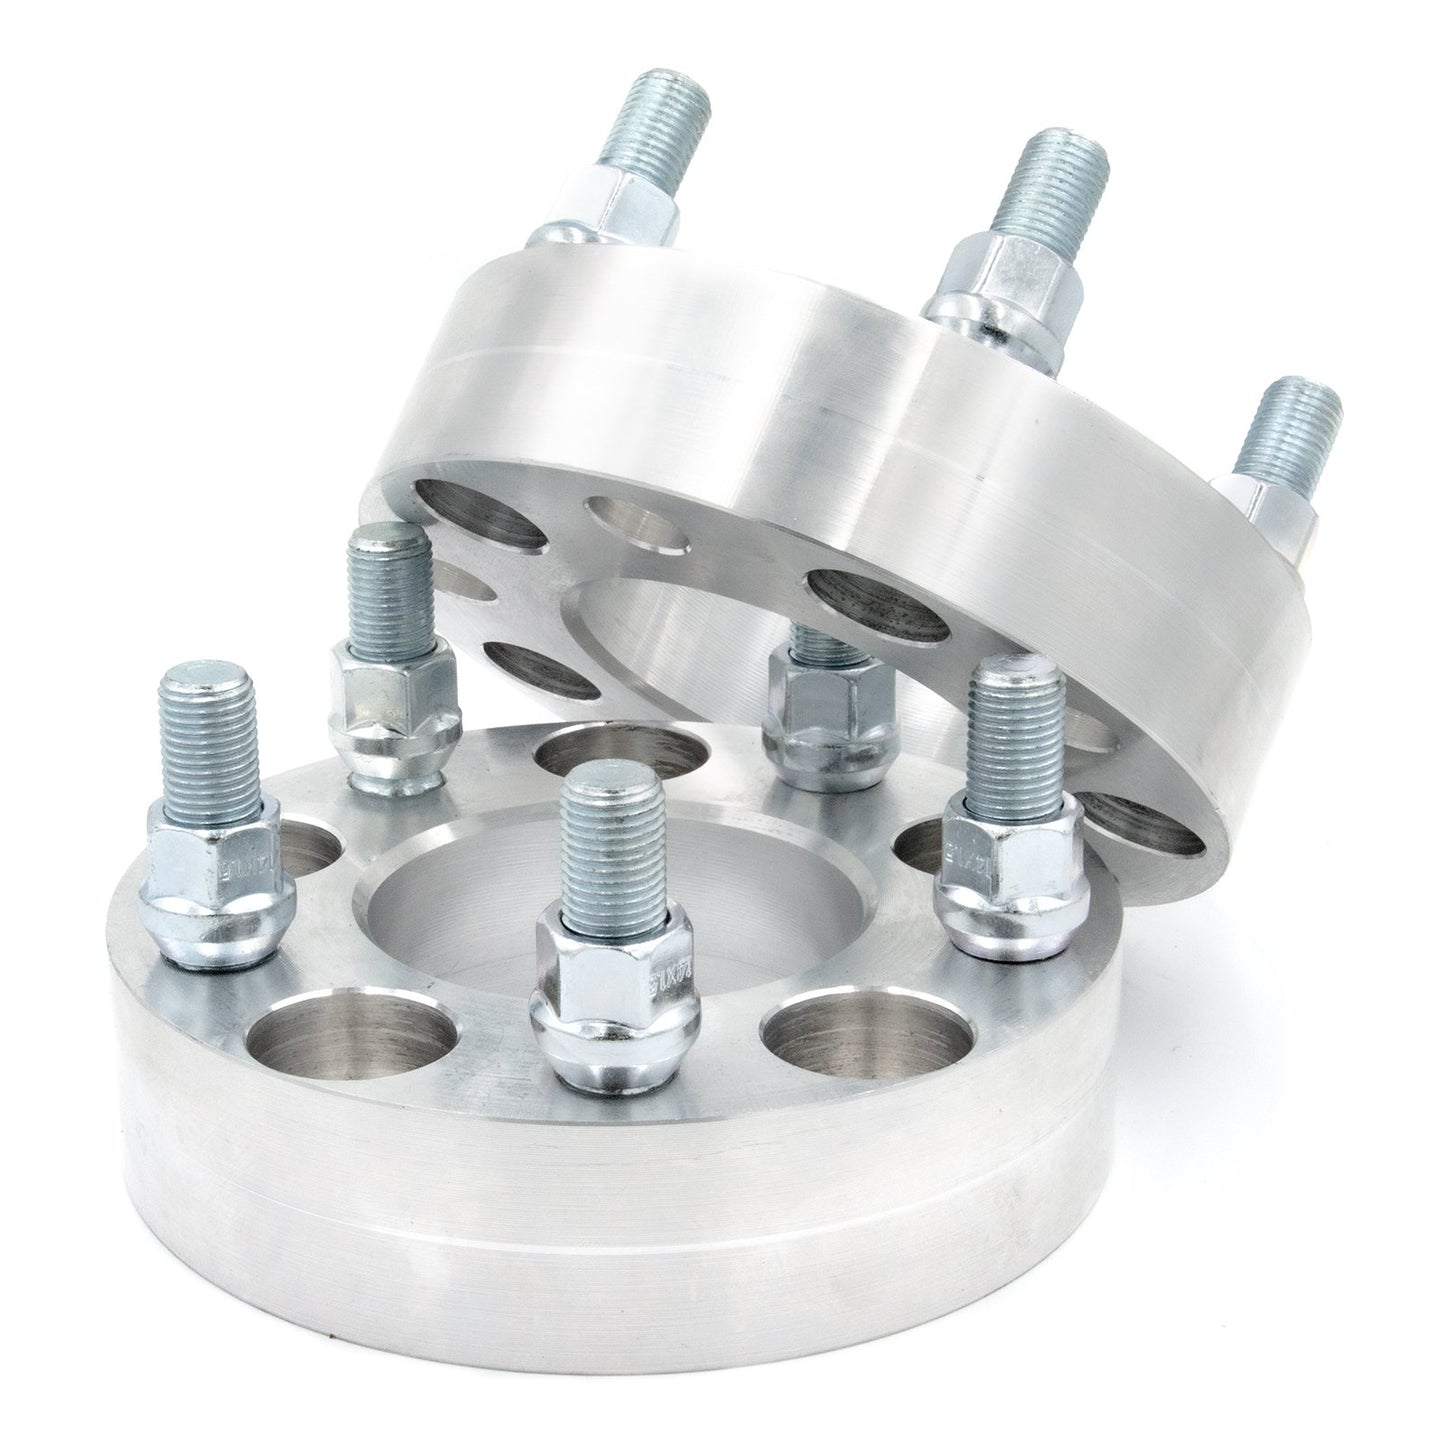 5x110 to 5x110 Wheel Spacer/Adapter - Thickness: 3/4"- 4"